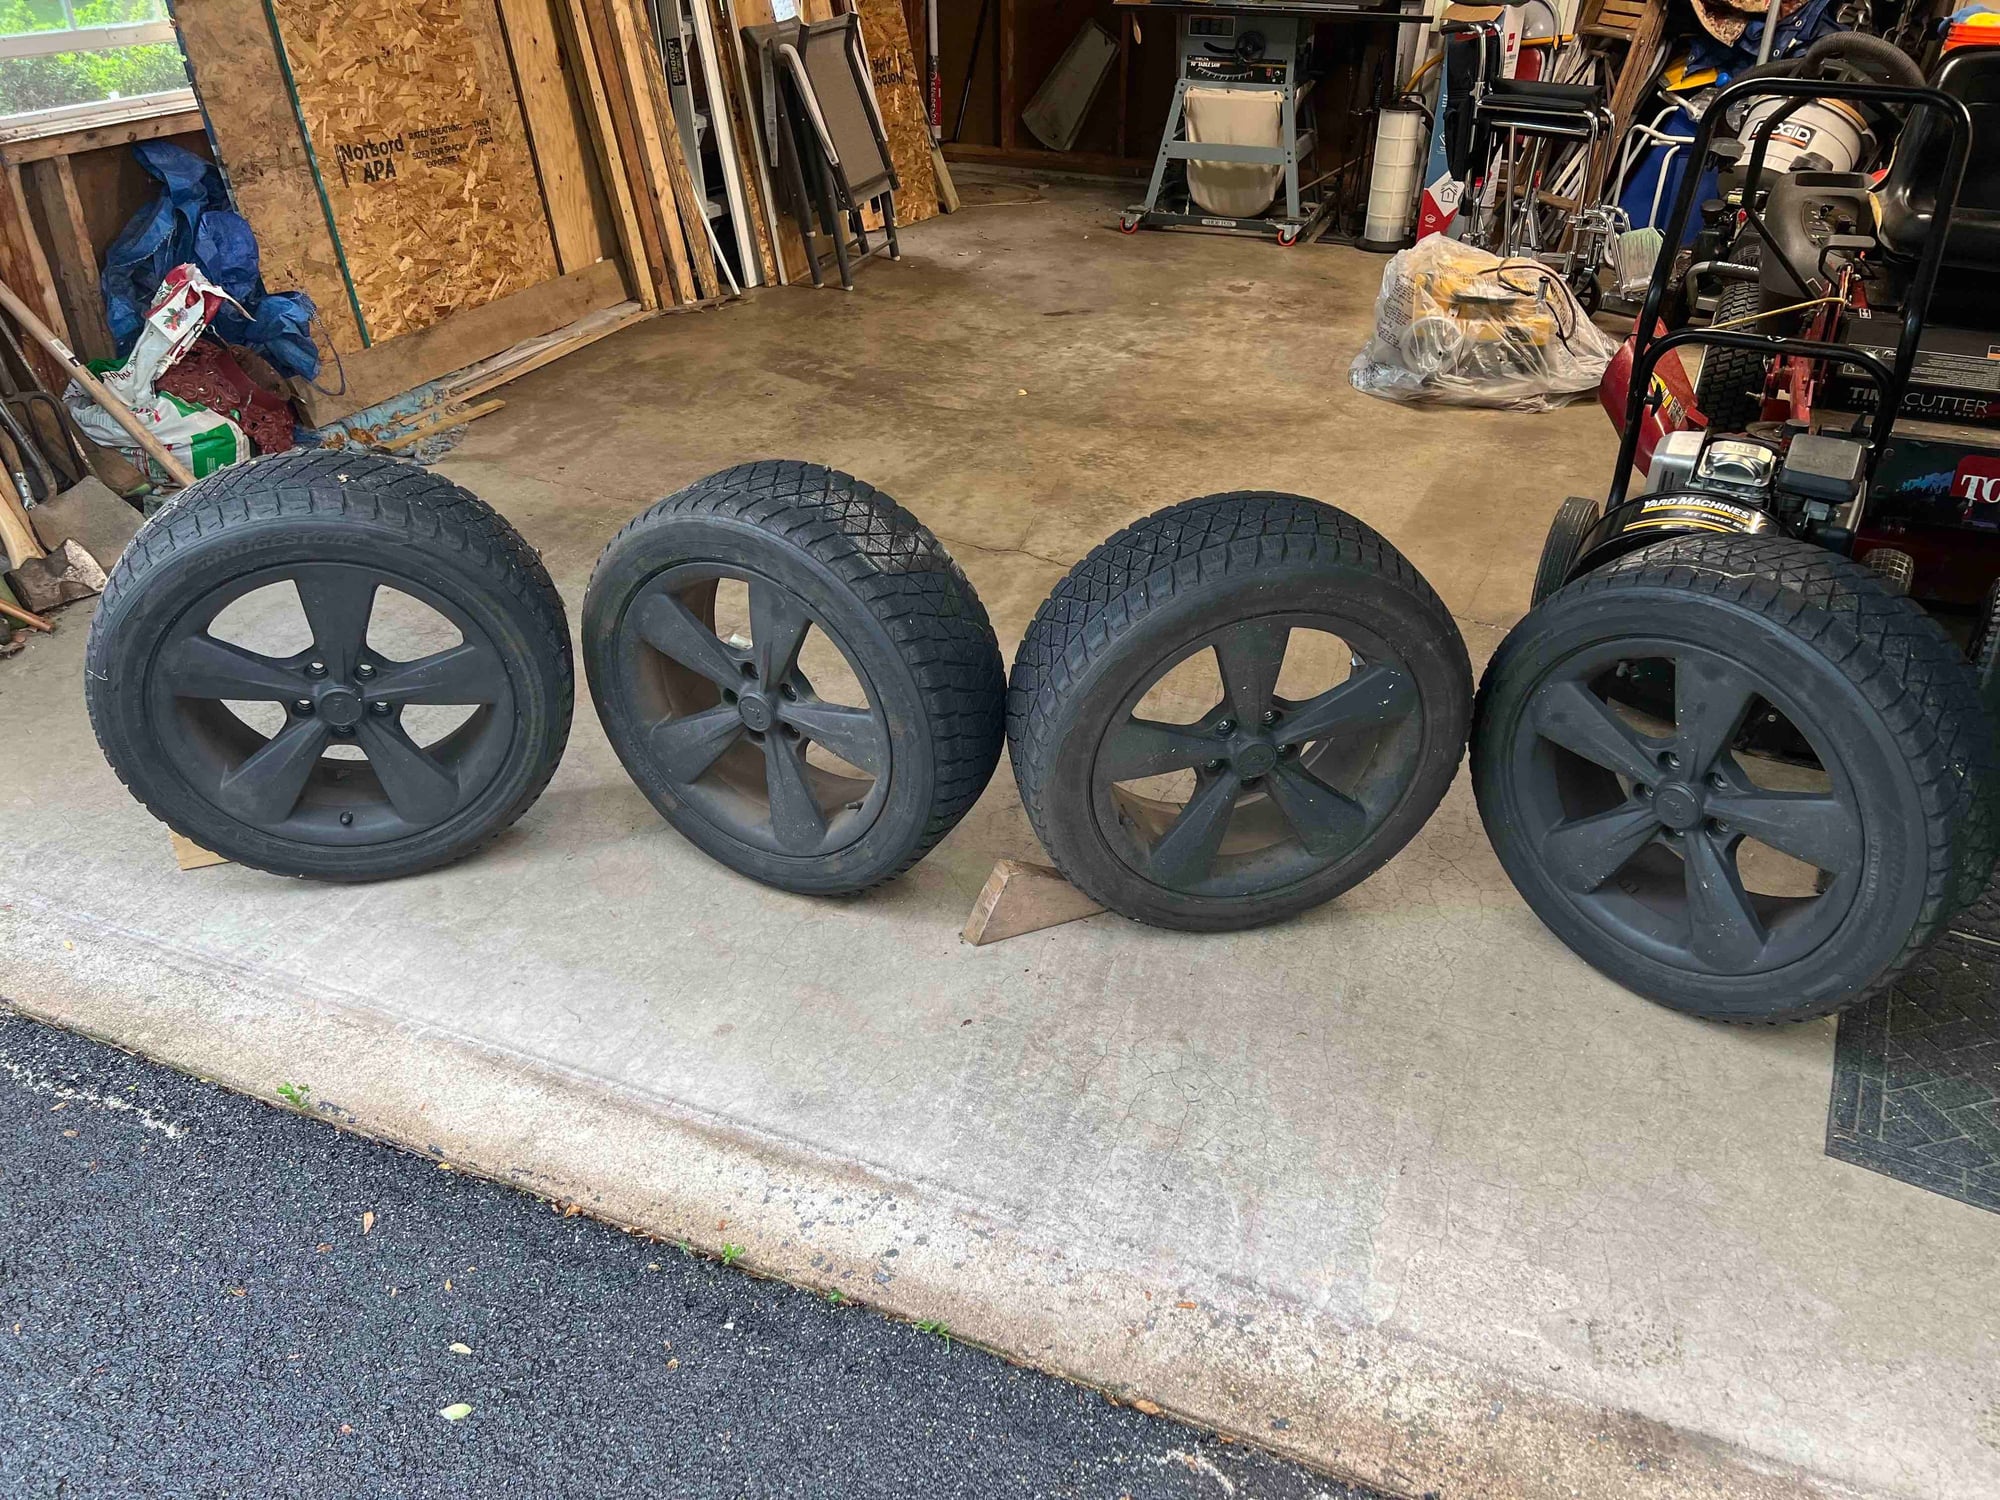 Wheels and Tires/Axles - Used - 4 OEM wheels with snow tires mounted and balanced - Used - 2013 to 2014 Ford Mustang - Dc Metro, VA 22206, United States